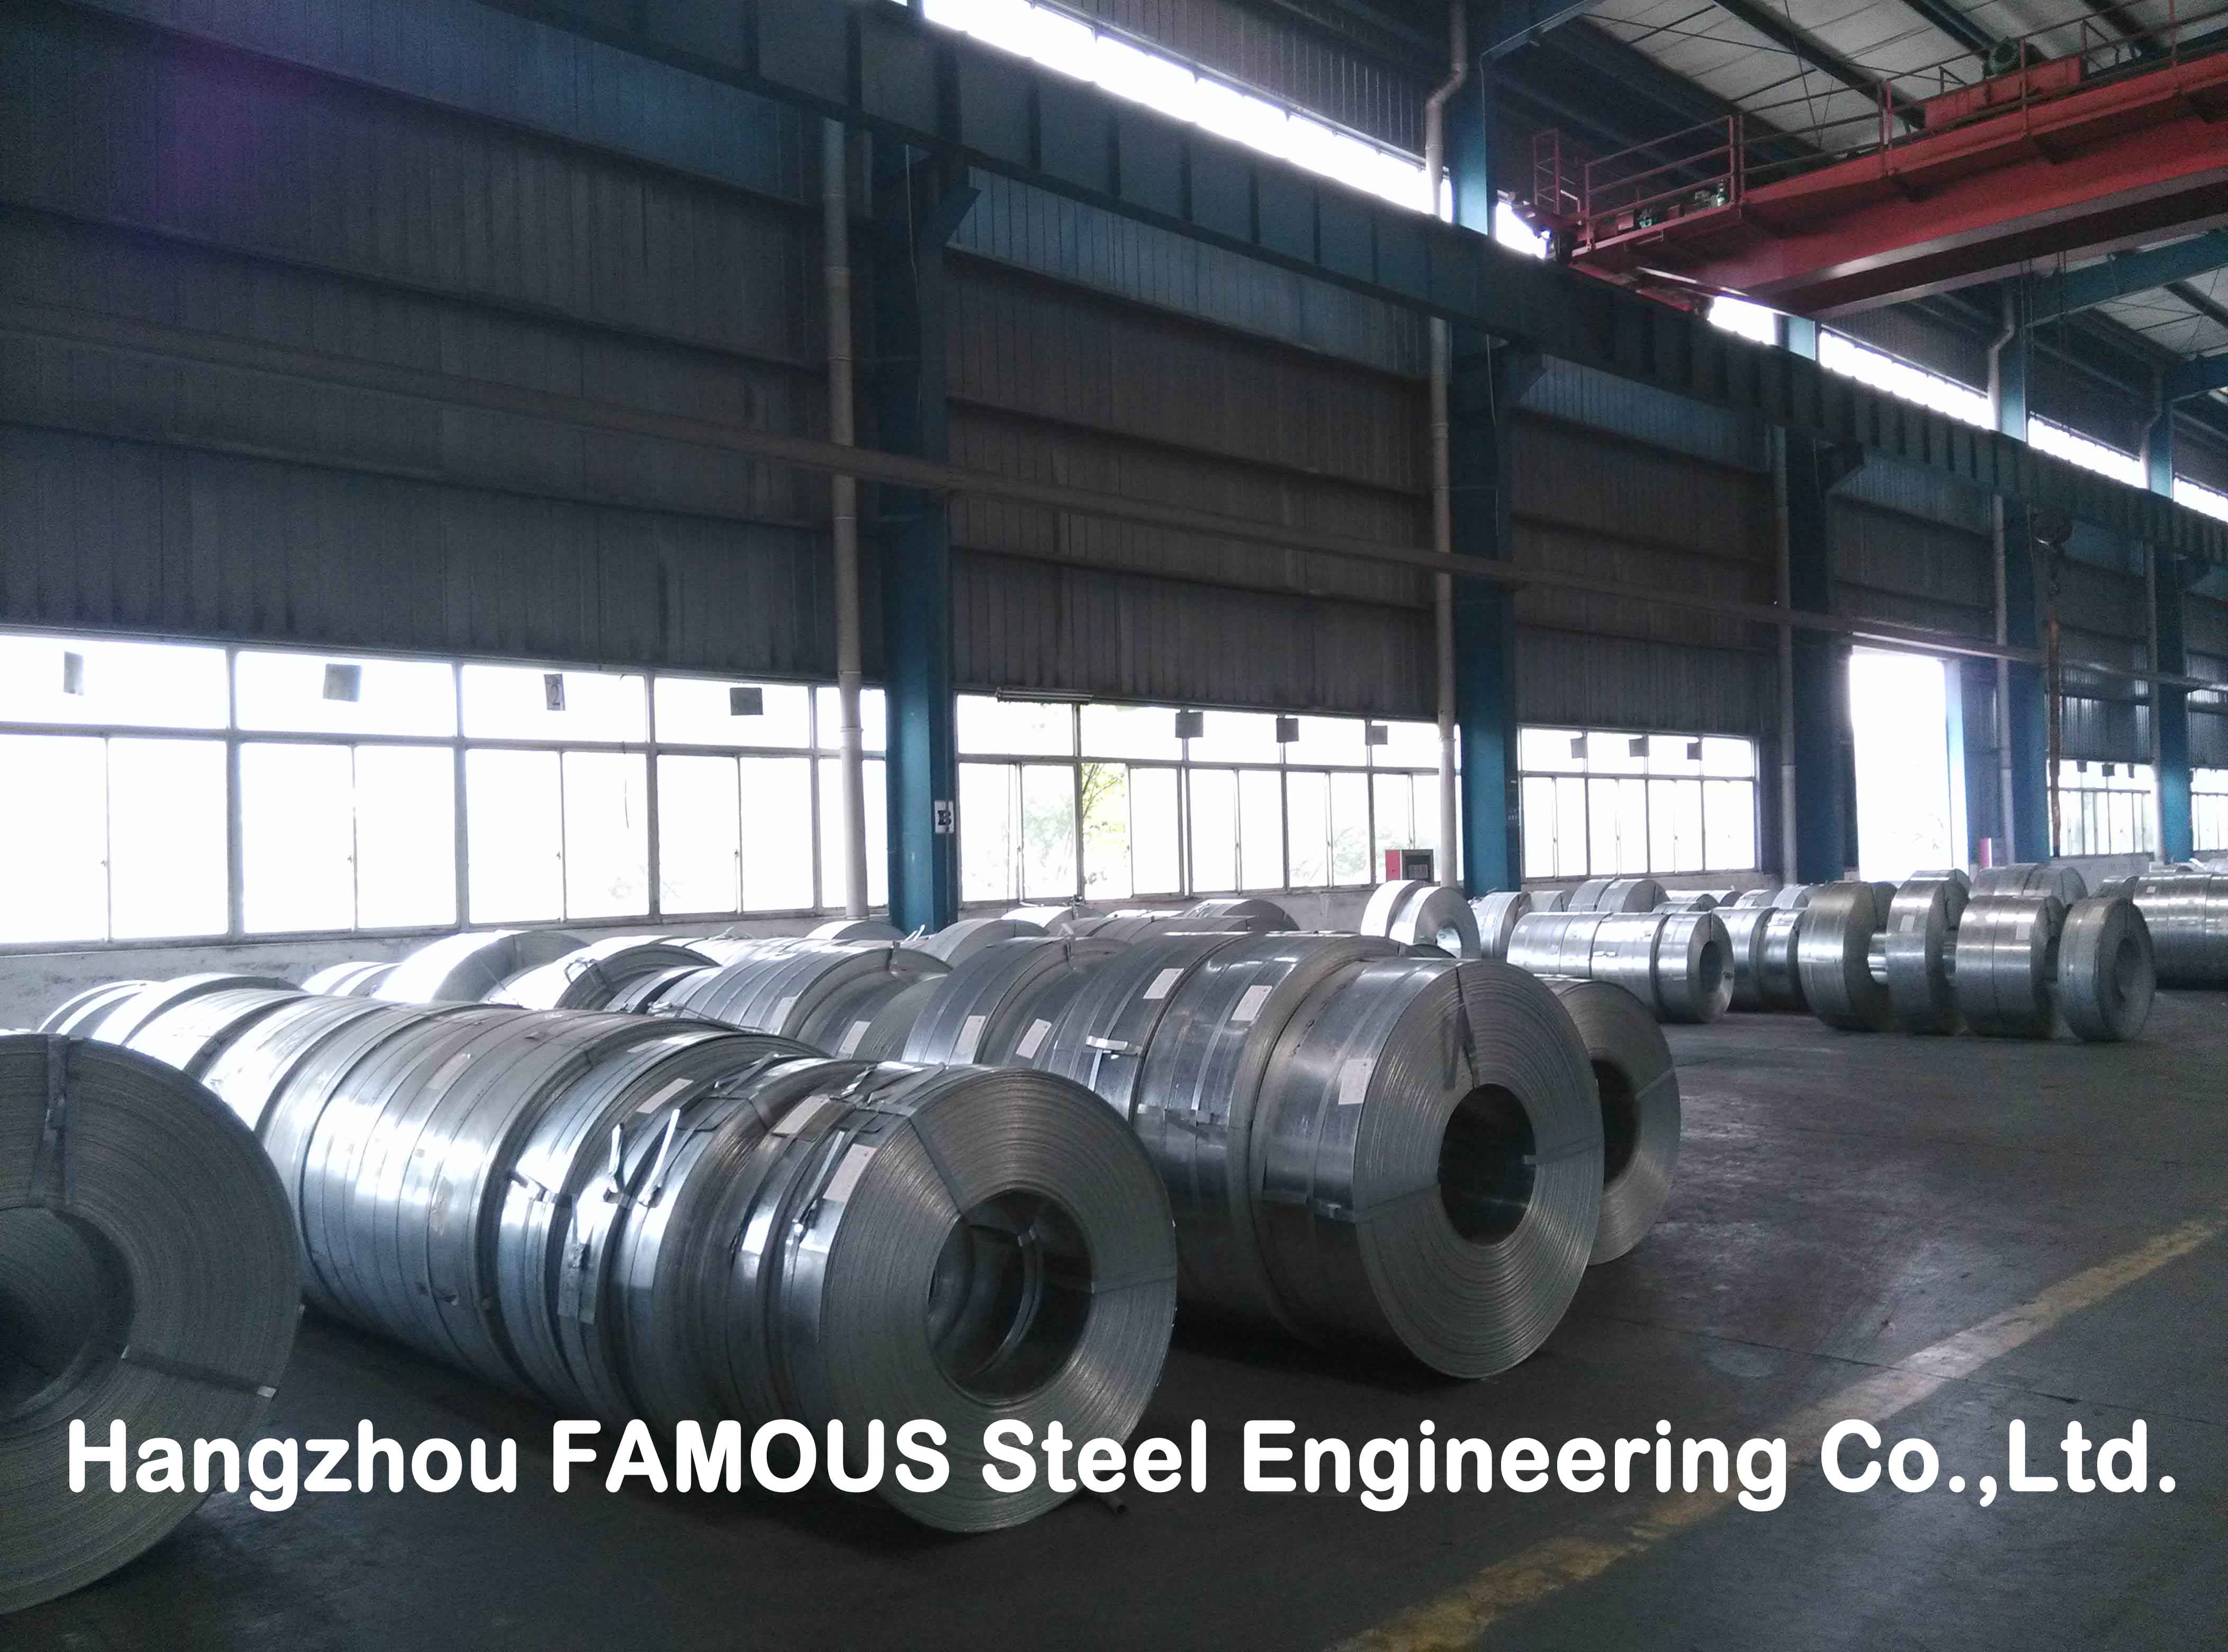 Cold Rolled Hot Dipped Galvanized Steel Strip Galvanized Steel Coil 600mm - 1500mm Width